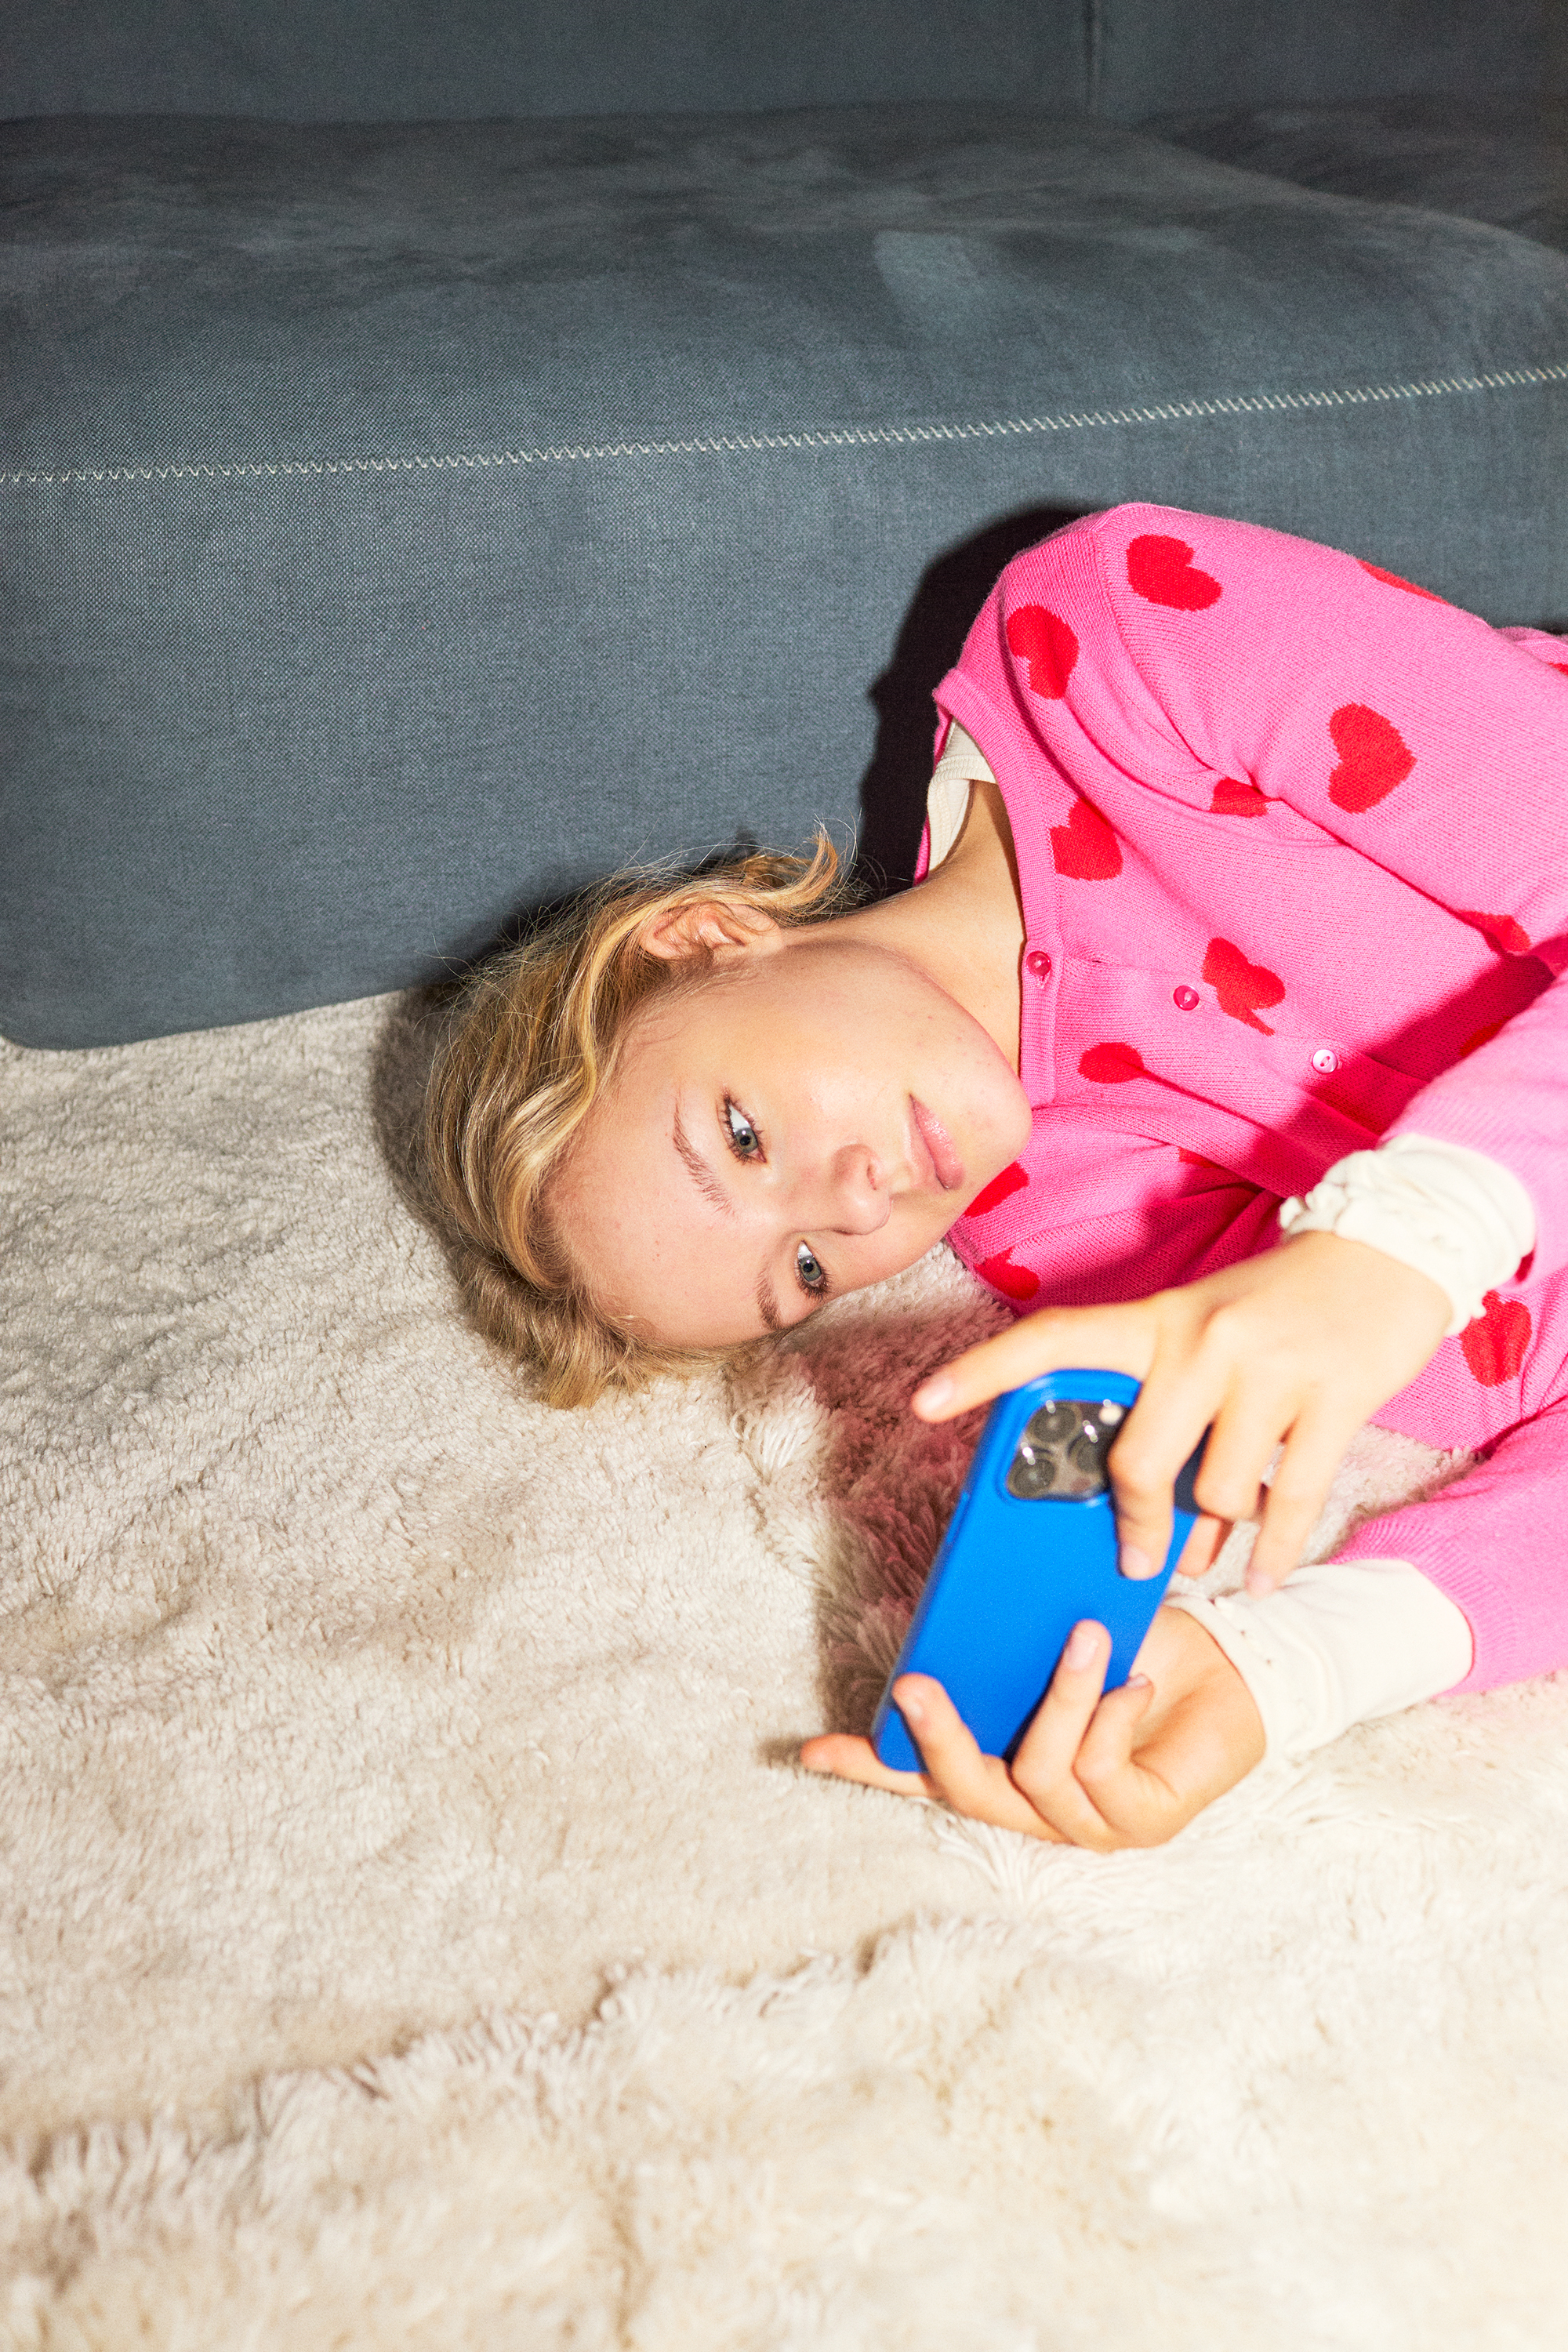 There is a photo of a blonde girl in her tween years playing on her phone laying down on a soft carpet. She is wearing a pink knitted jersey with hearts. The girl looks focused and the photo has bright highlights.